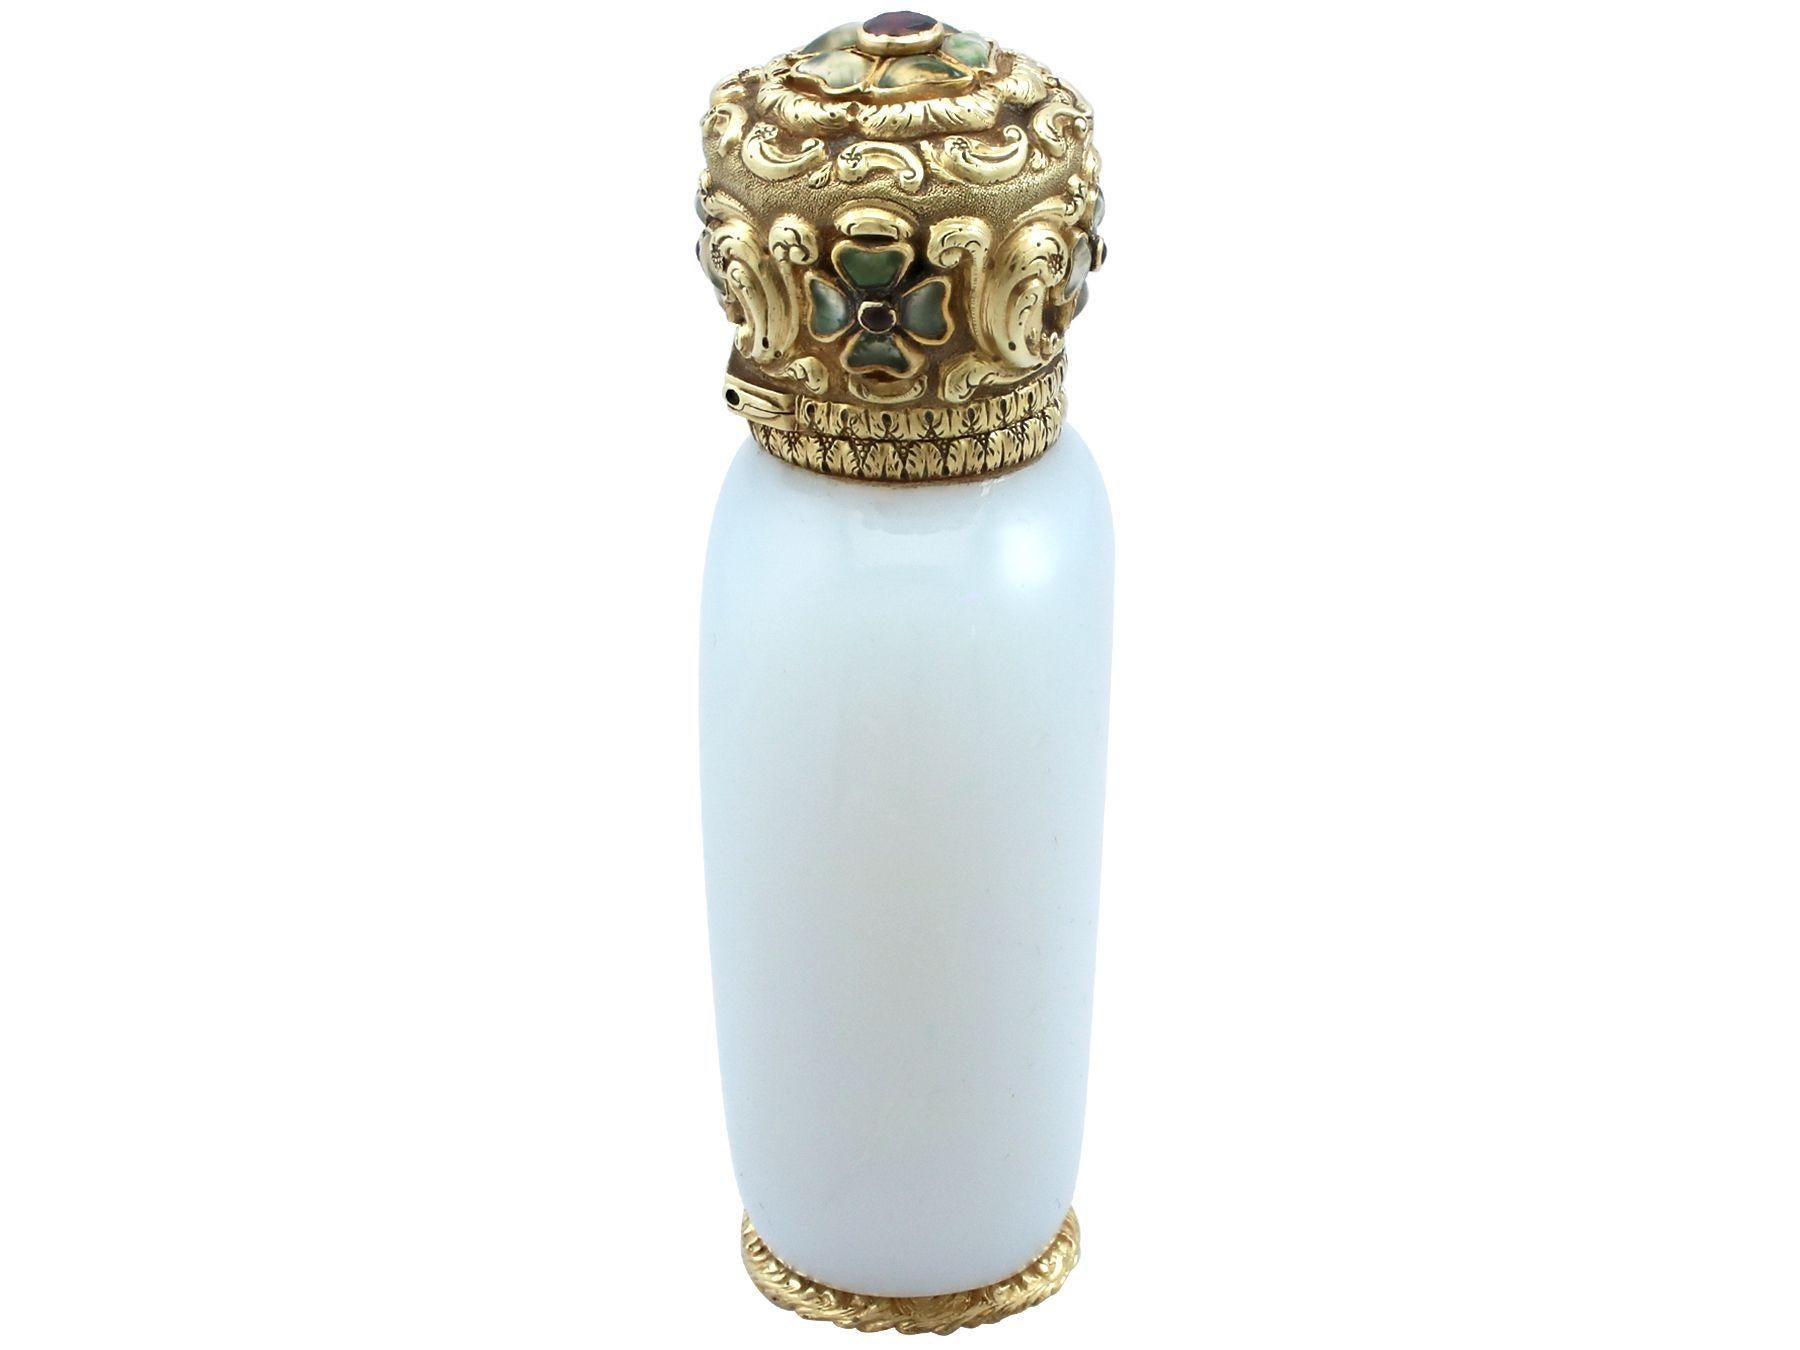 Antique Yellow Gold, Garnet, Ruby, Hardstone and Glass Scent Bottle, circa 1845 For Sale 1